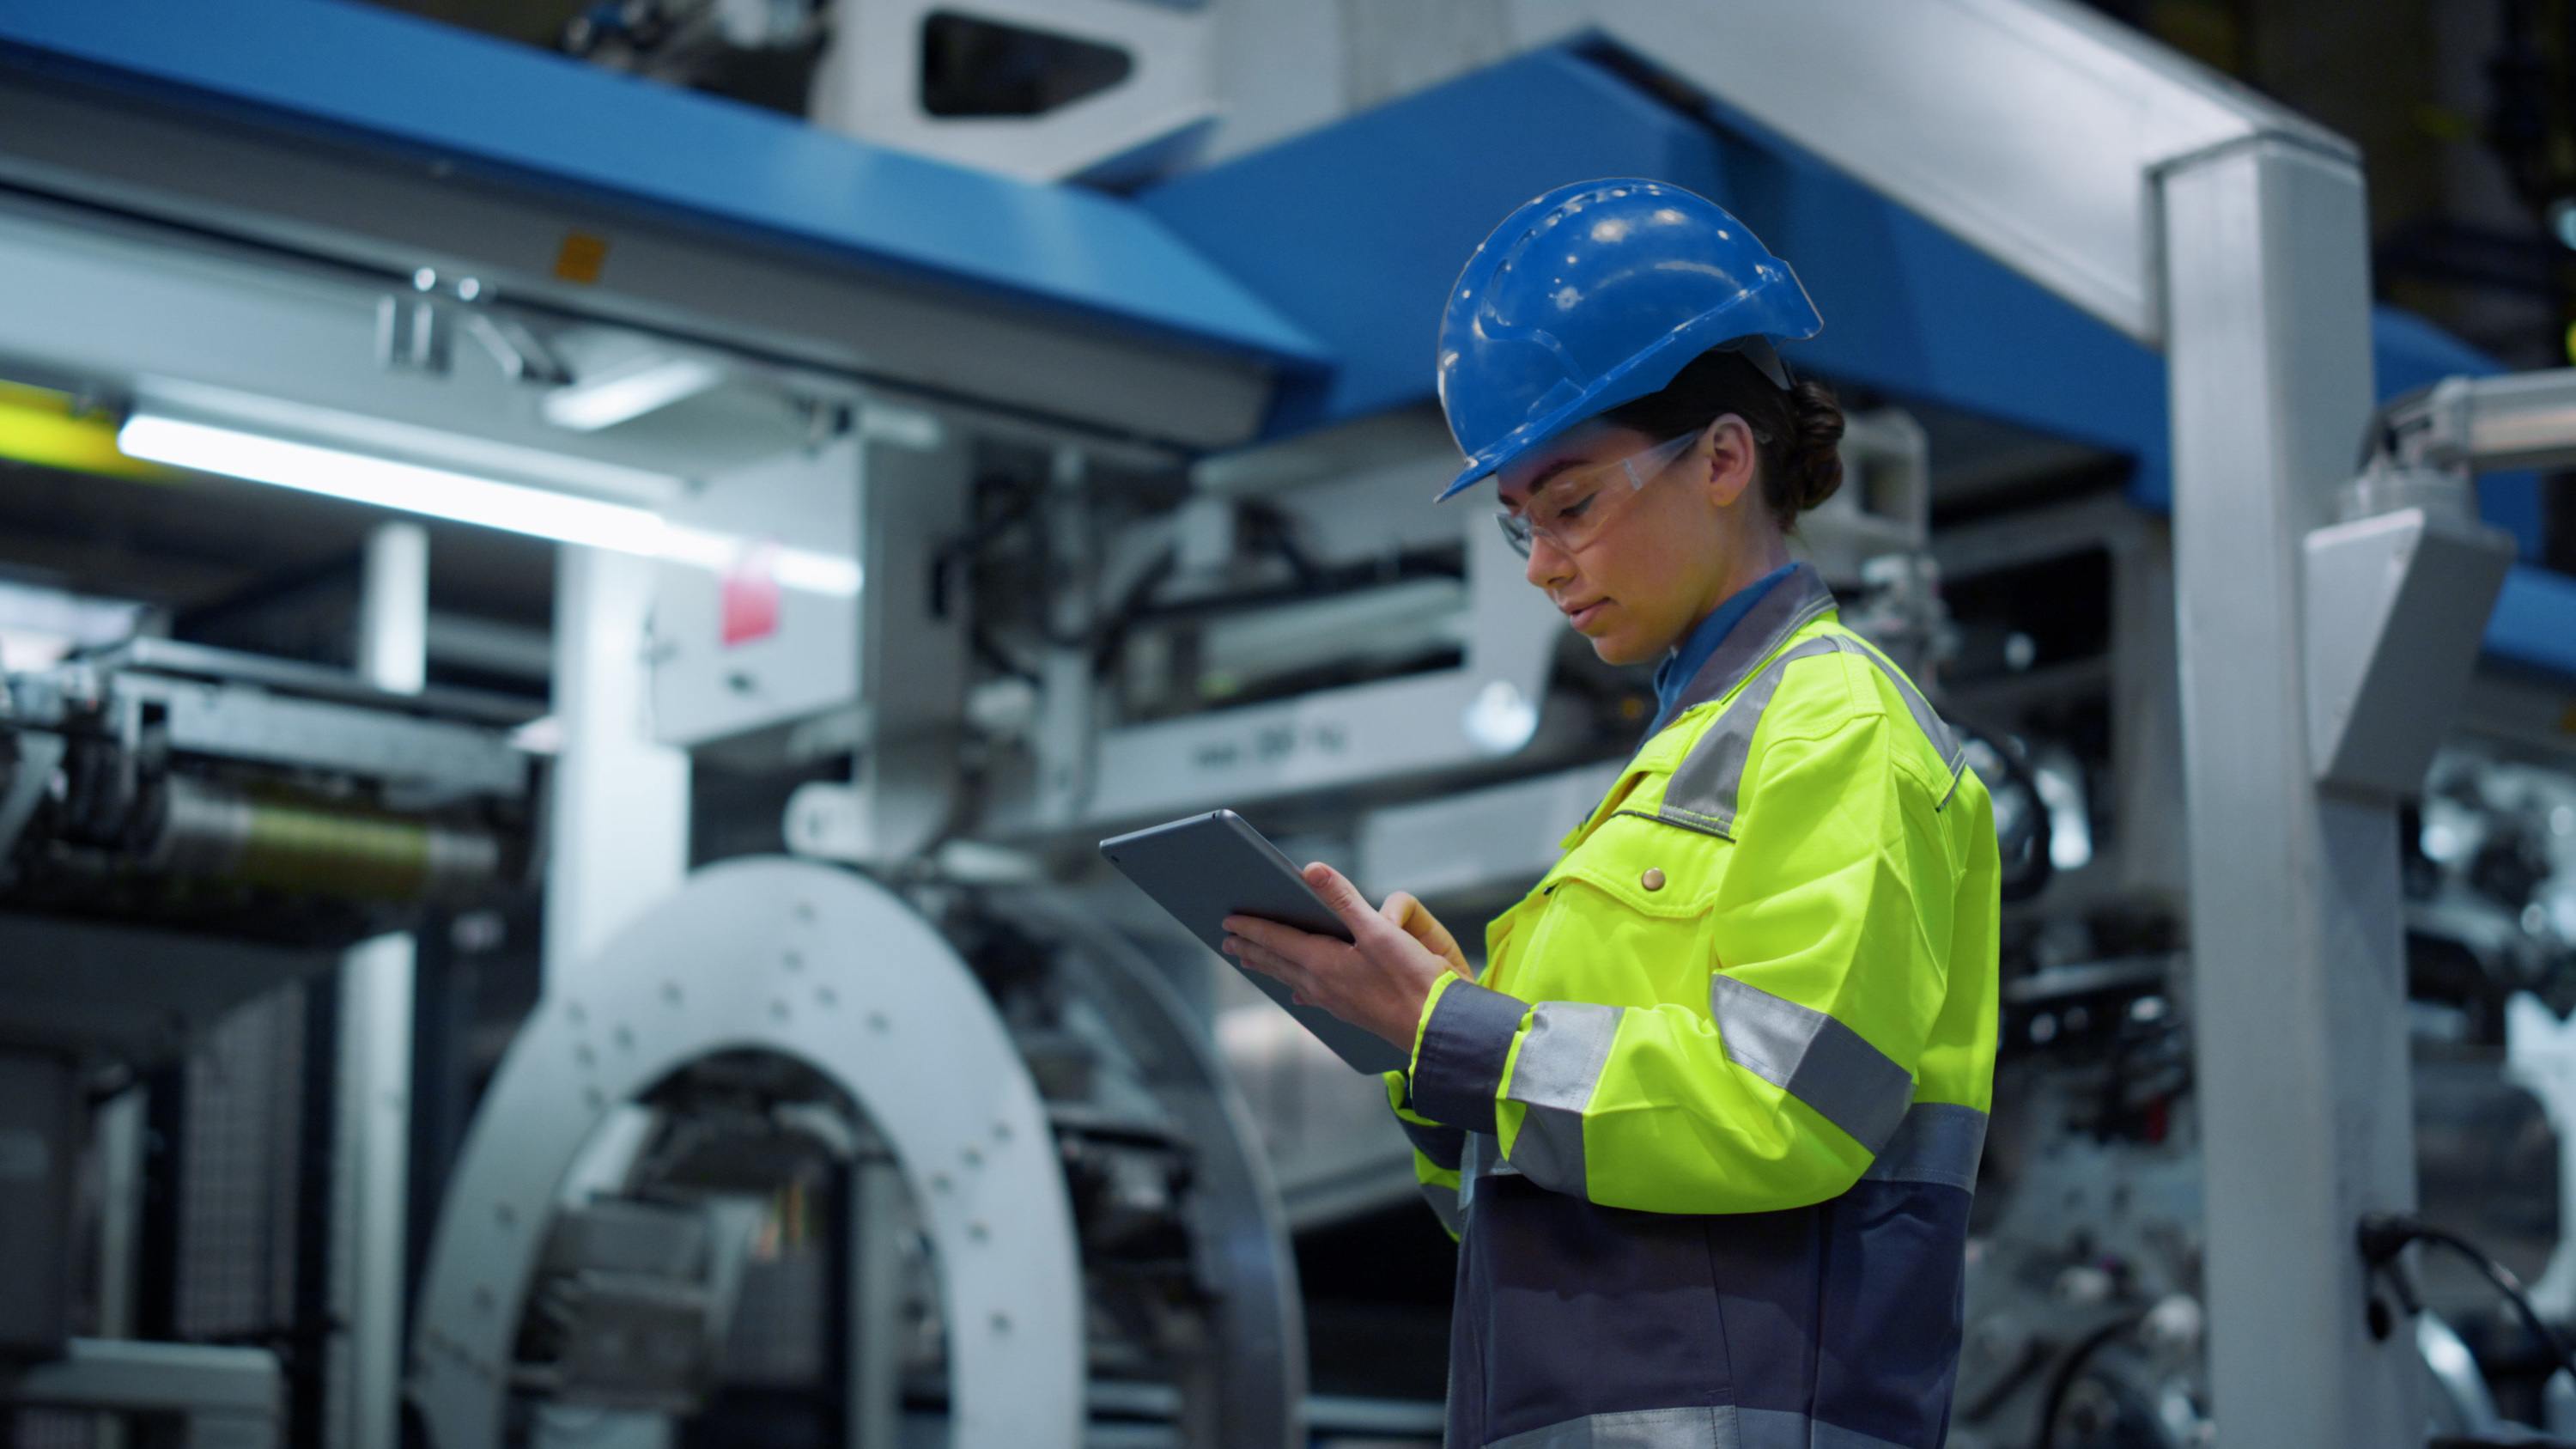 A woman in safety clothing checks process sequences of a machine on a tablet.